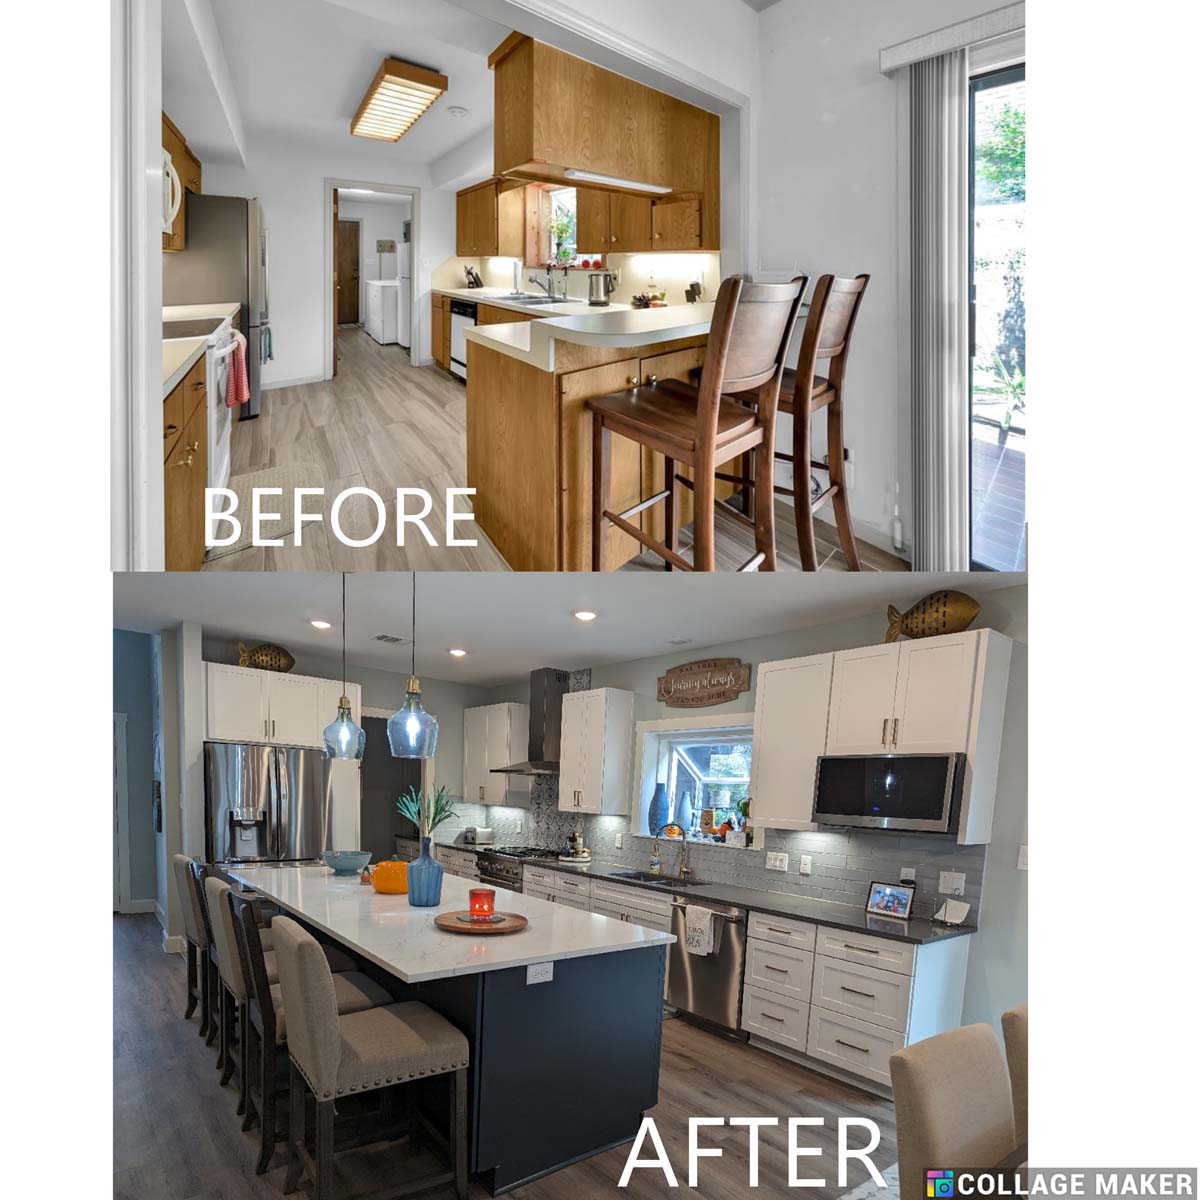 Remodel before / after